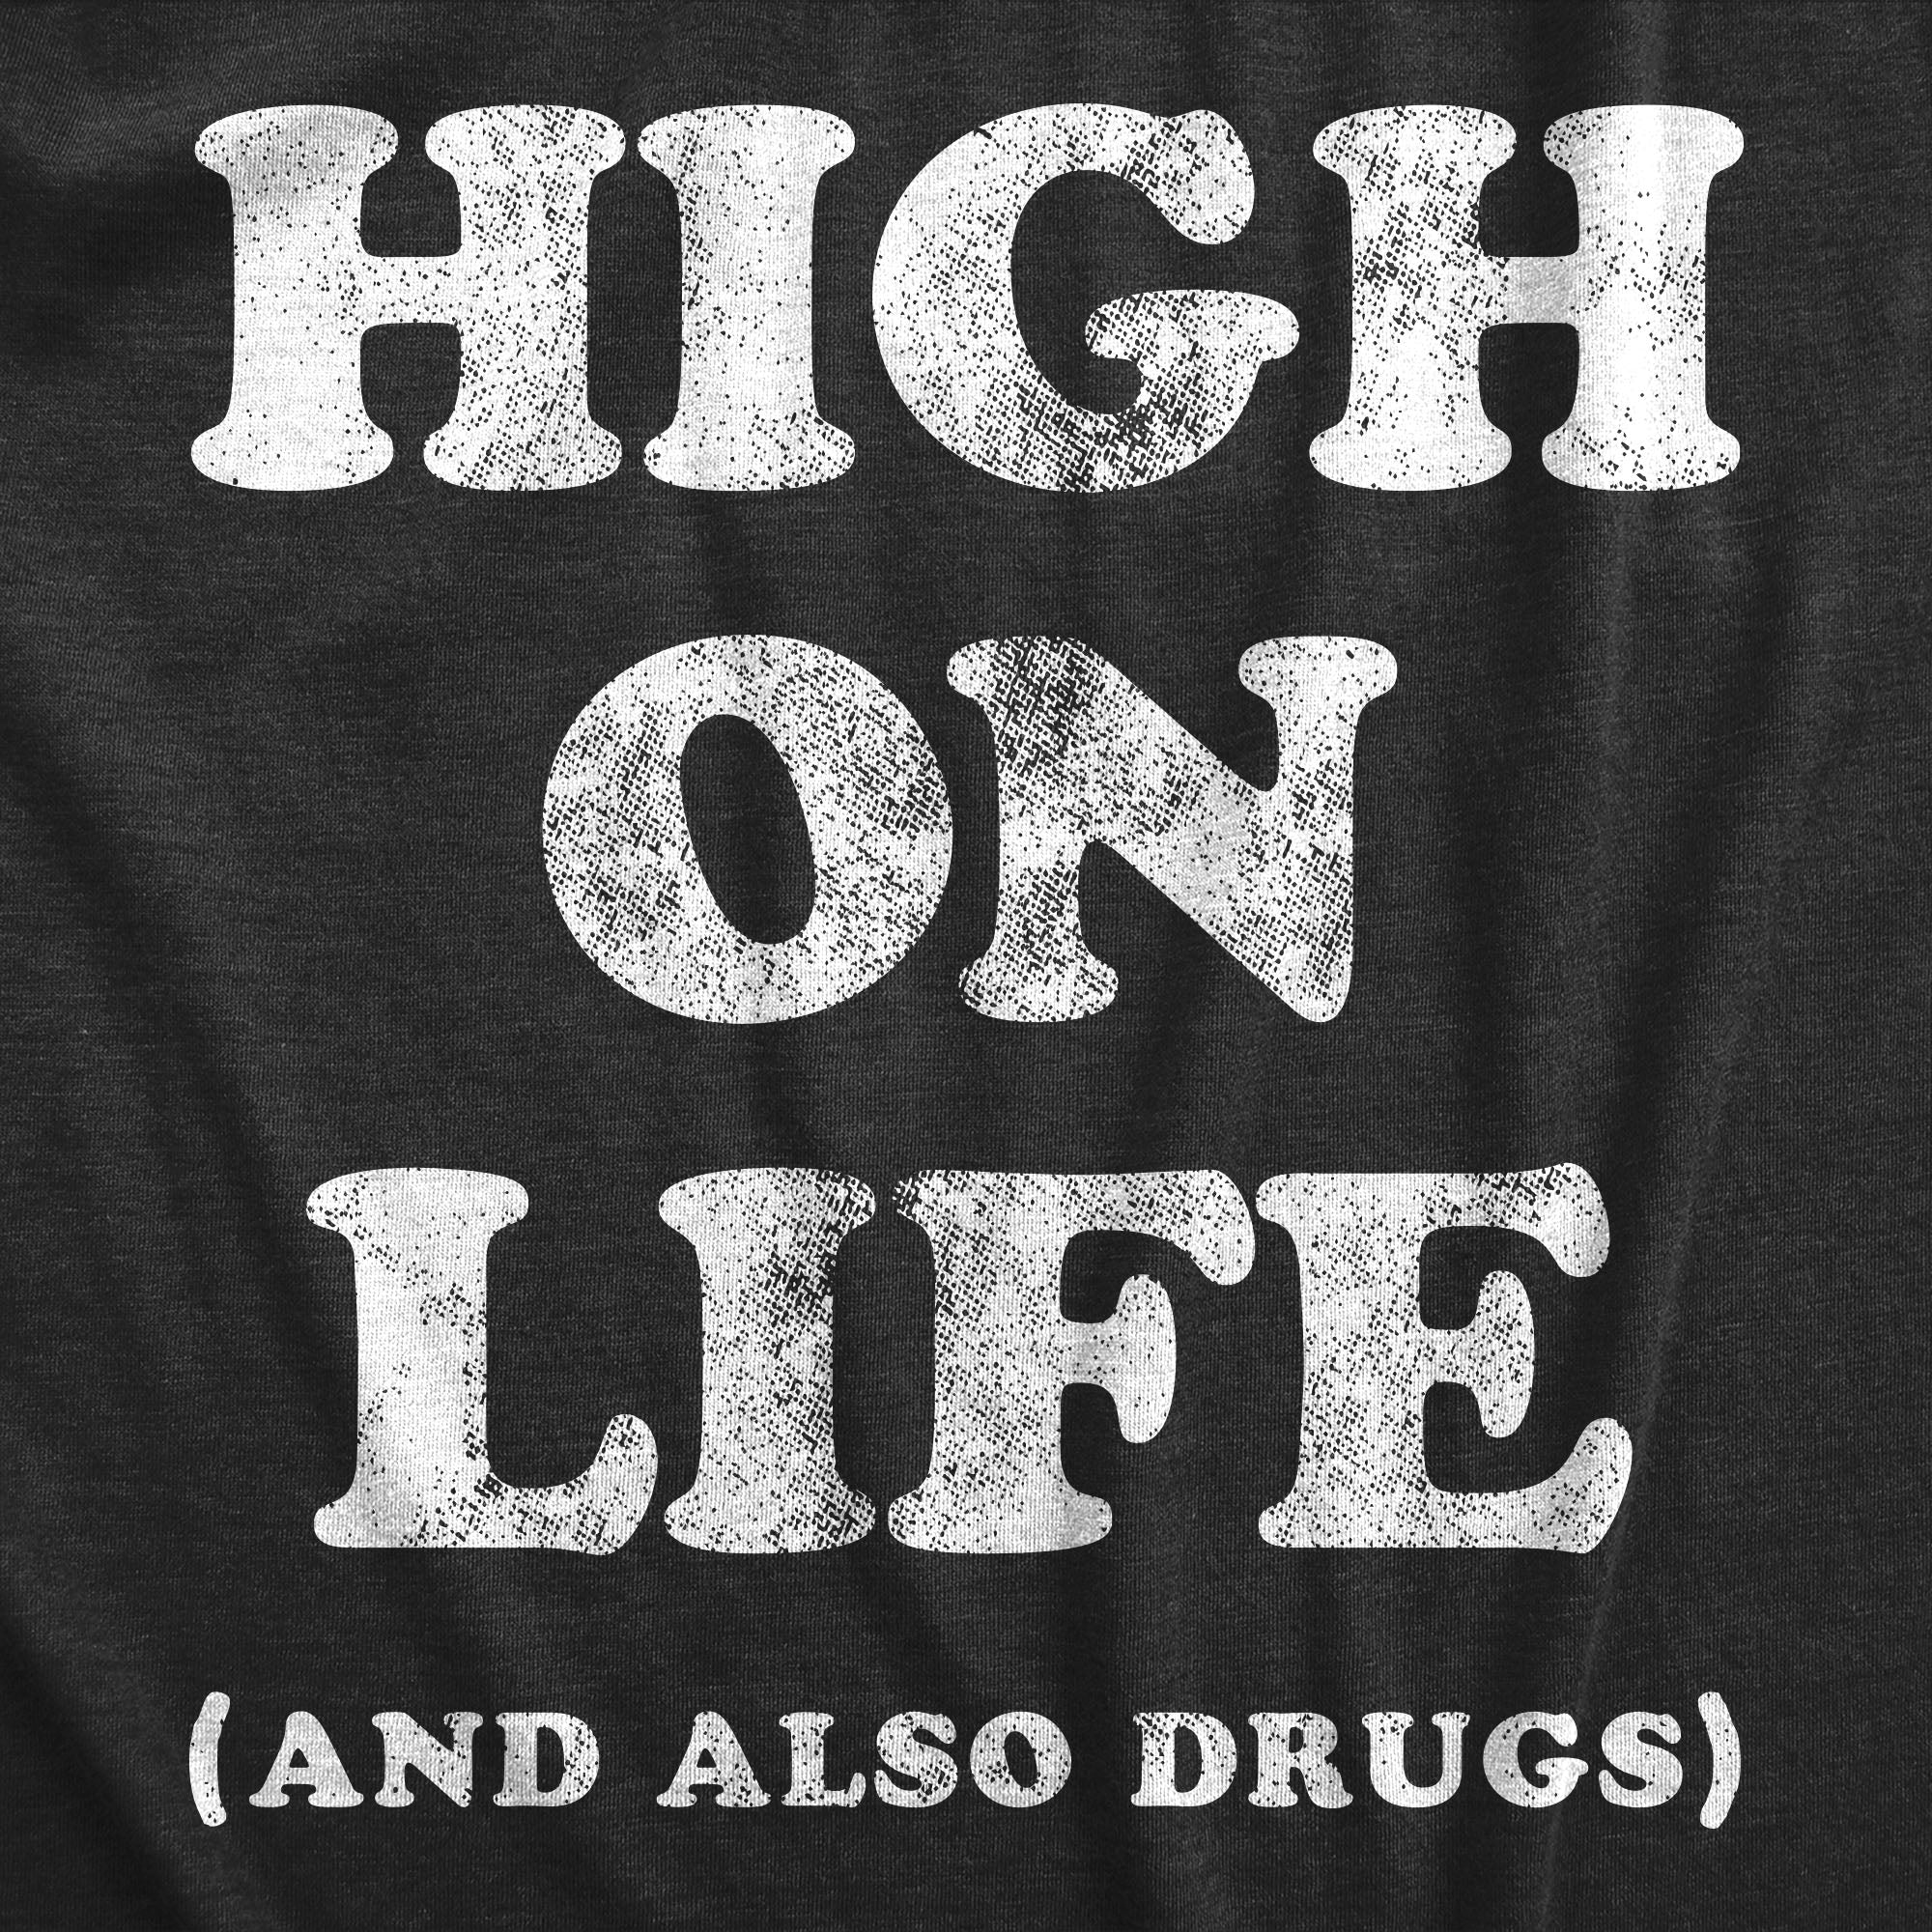 Funny Heather Black - LIFE High On Life And Also Drugs Womens T Shirt Nerdy 420 Sarcastic Tee